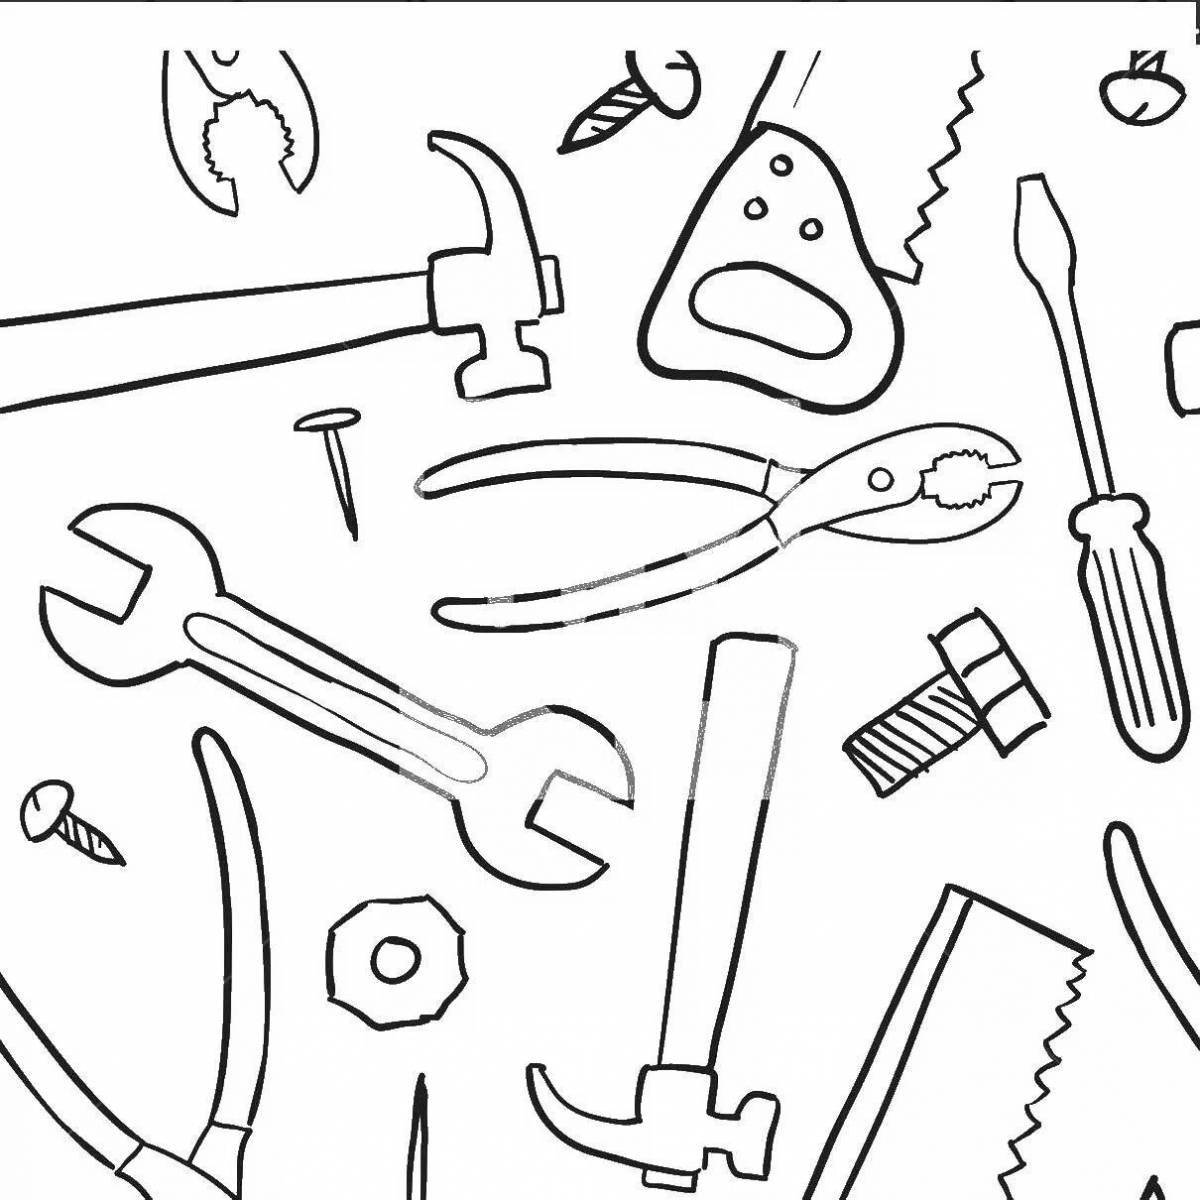 Color-vibrant tools coloring page